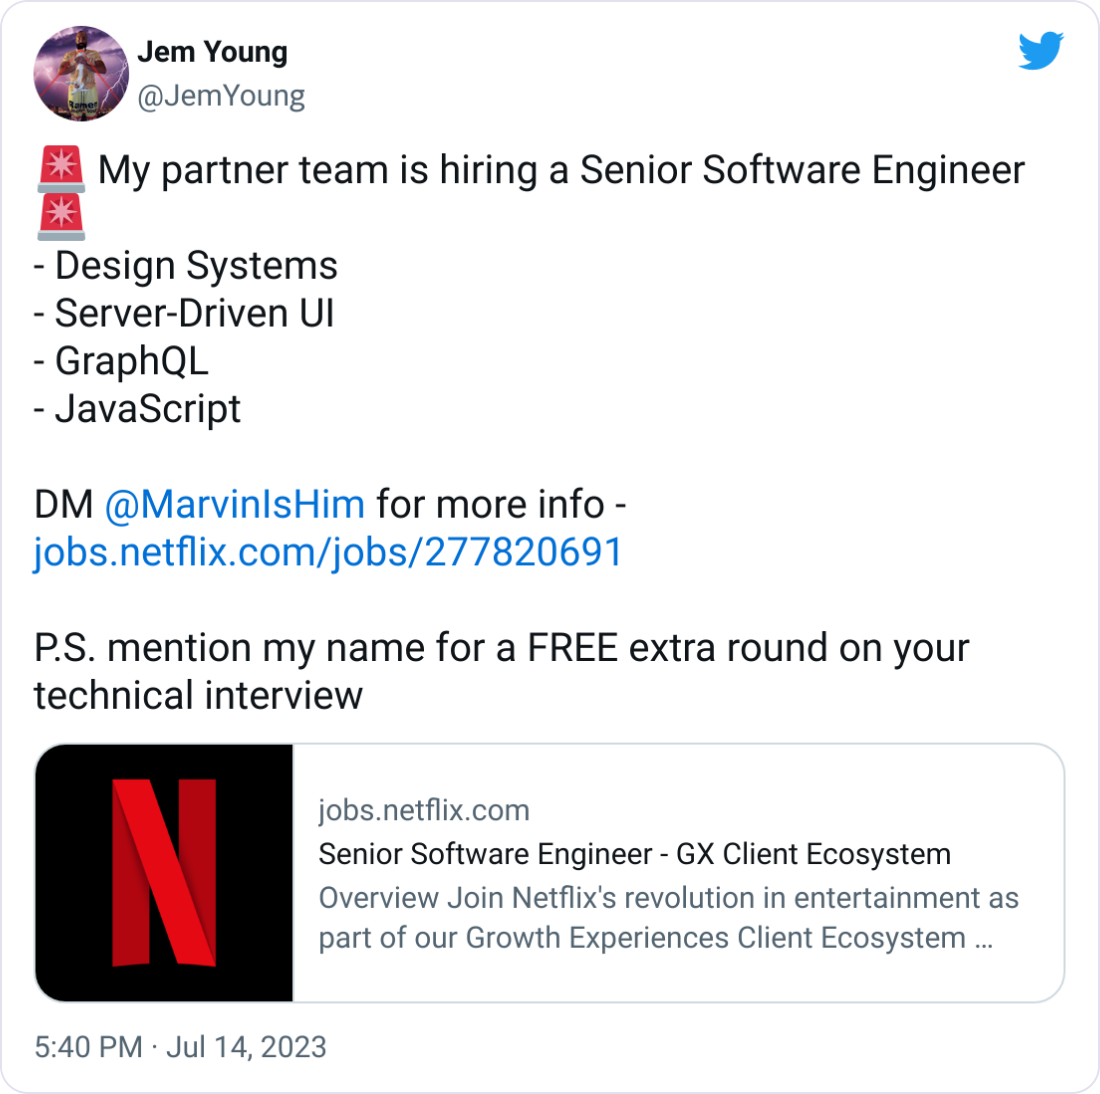 Jem Young @JemYoung 🚨 My partner team is hiring a Senior Software Engineer 🚨 - Design Systems  - Server-Driven UI  - GraphQL  - JavaScript    DM  @MarvinIsHim  for more info - https://jobs.netflix.com/jobs/277820691  P.S. mention my name for a FREE extra round on your technical interview